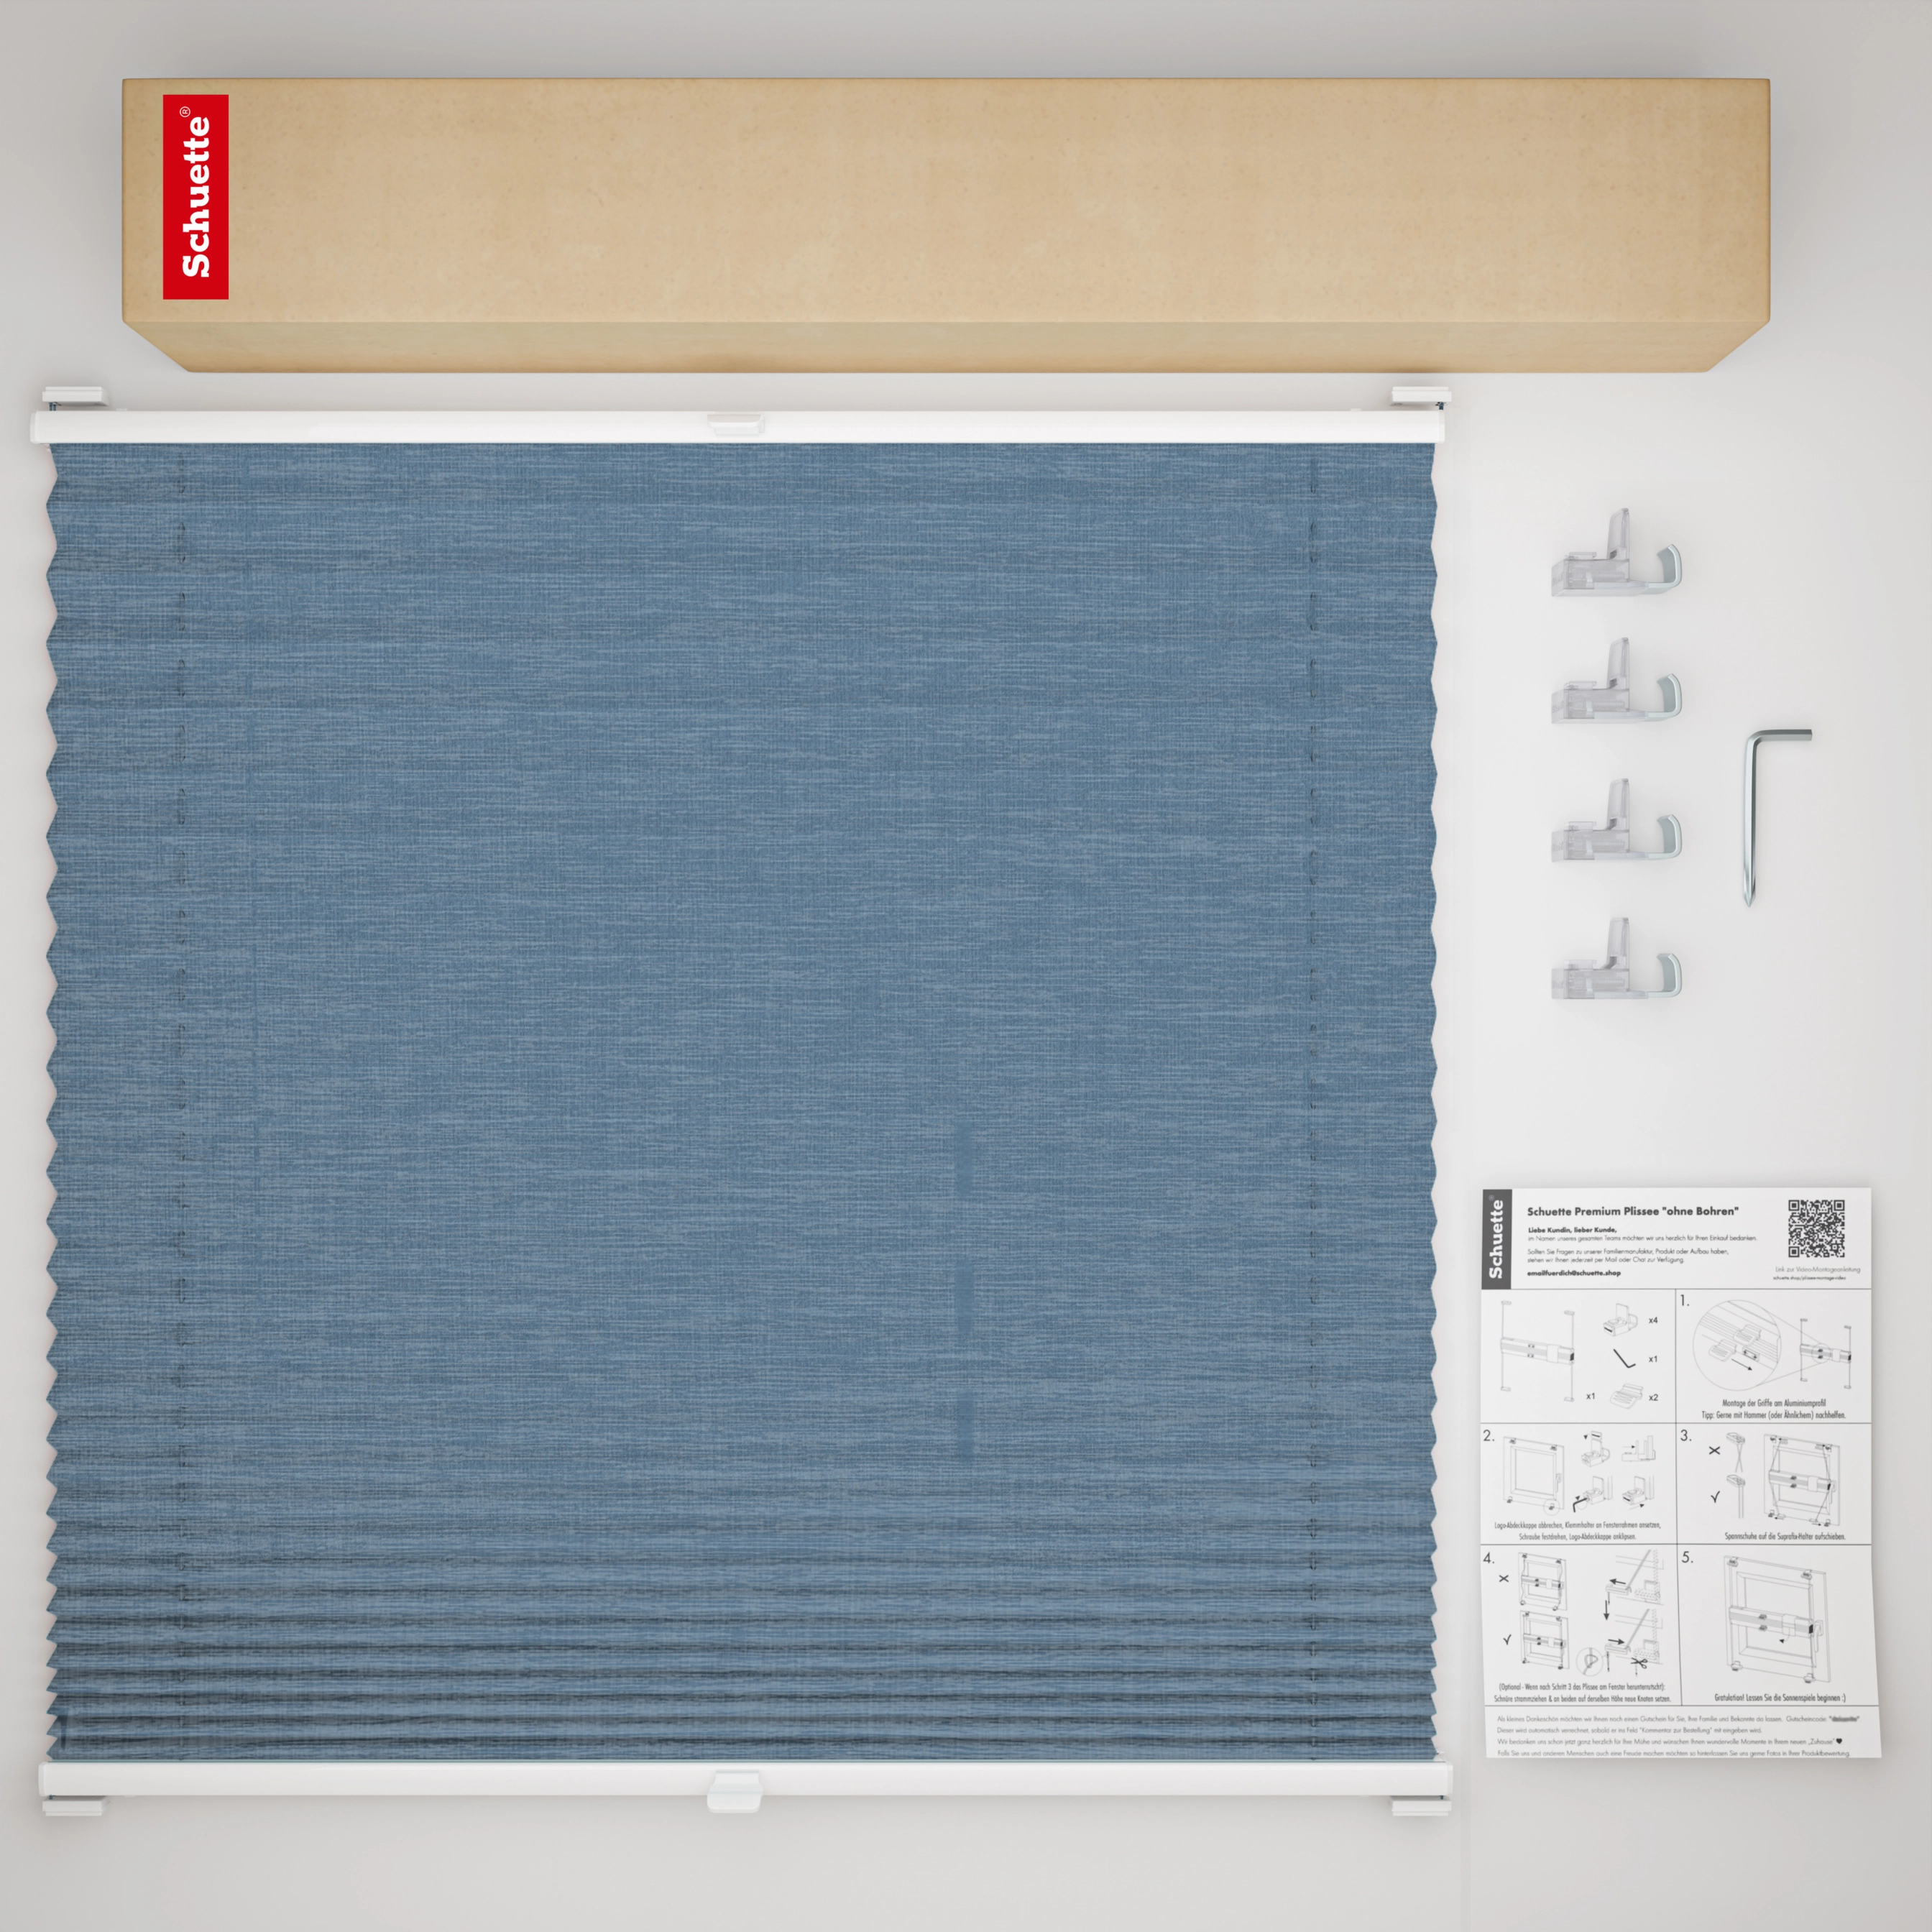 Schuette® Pleated Blind Made to Measure without Drilling • Suprafix Clamp holder “Incognito" Standard” • Melange Collection: After Rain (Blue) • Profile Colour: White